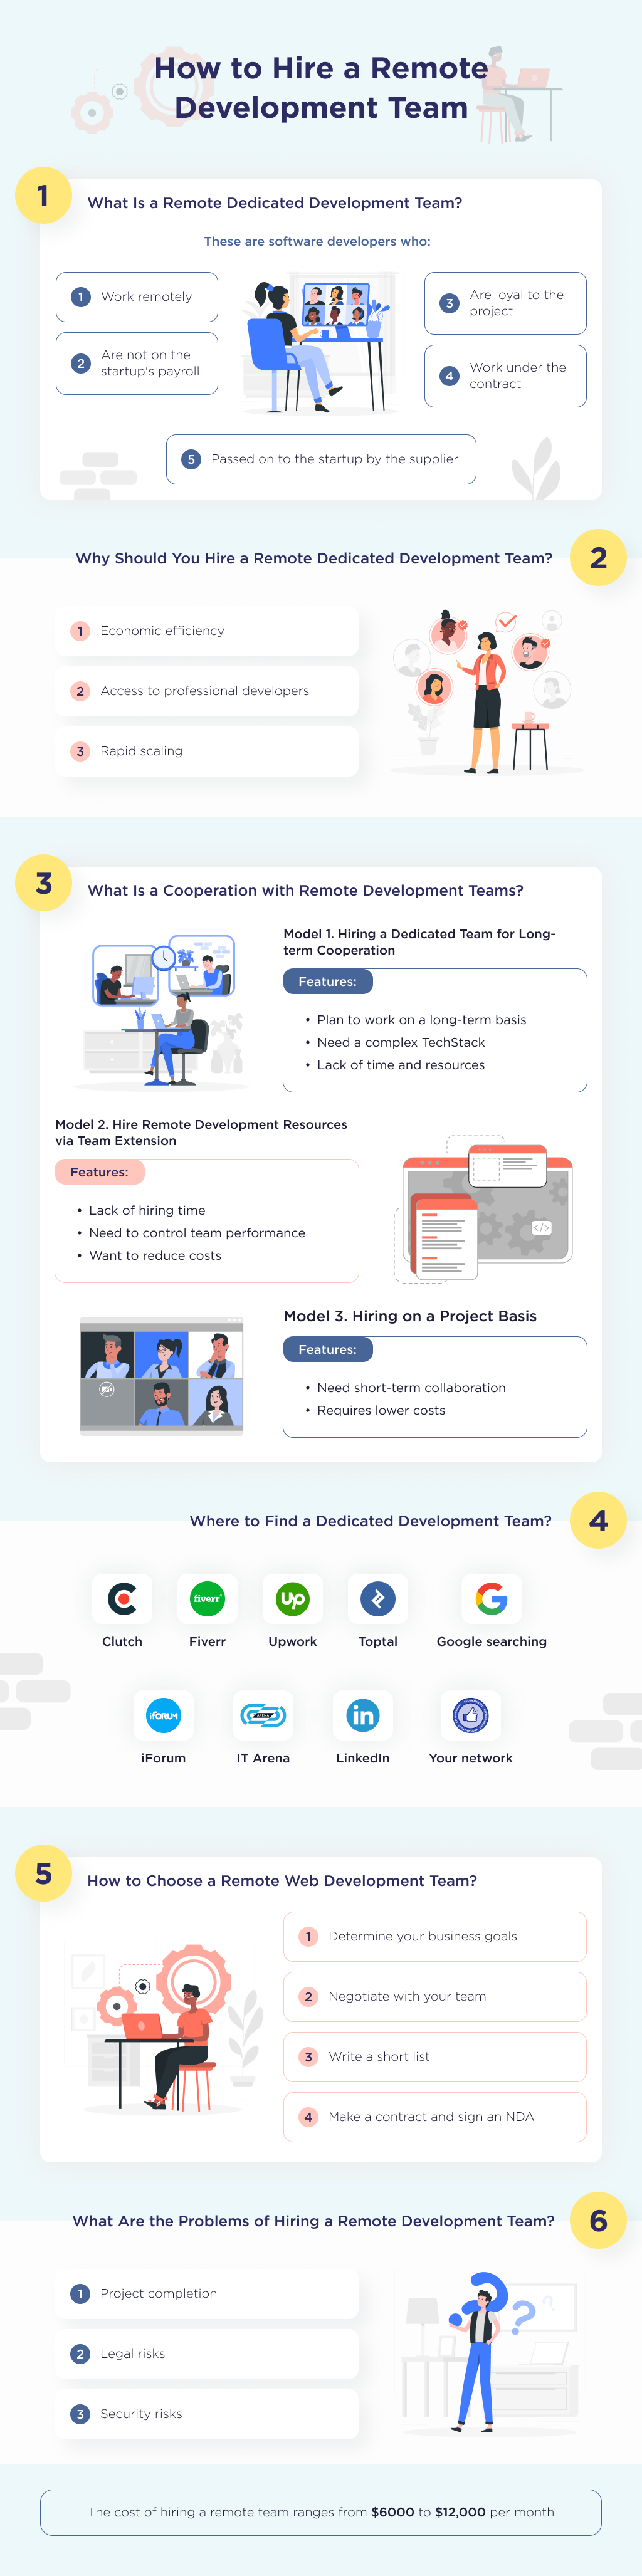 This infographic shows the step-by-step process of hiring a remote dedicated development team with detailed cost